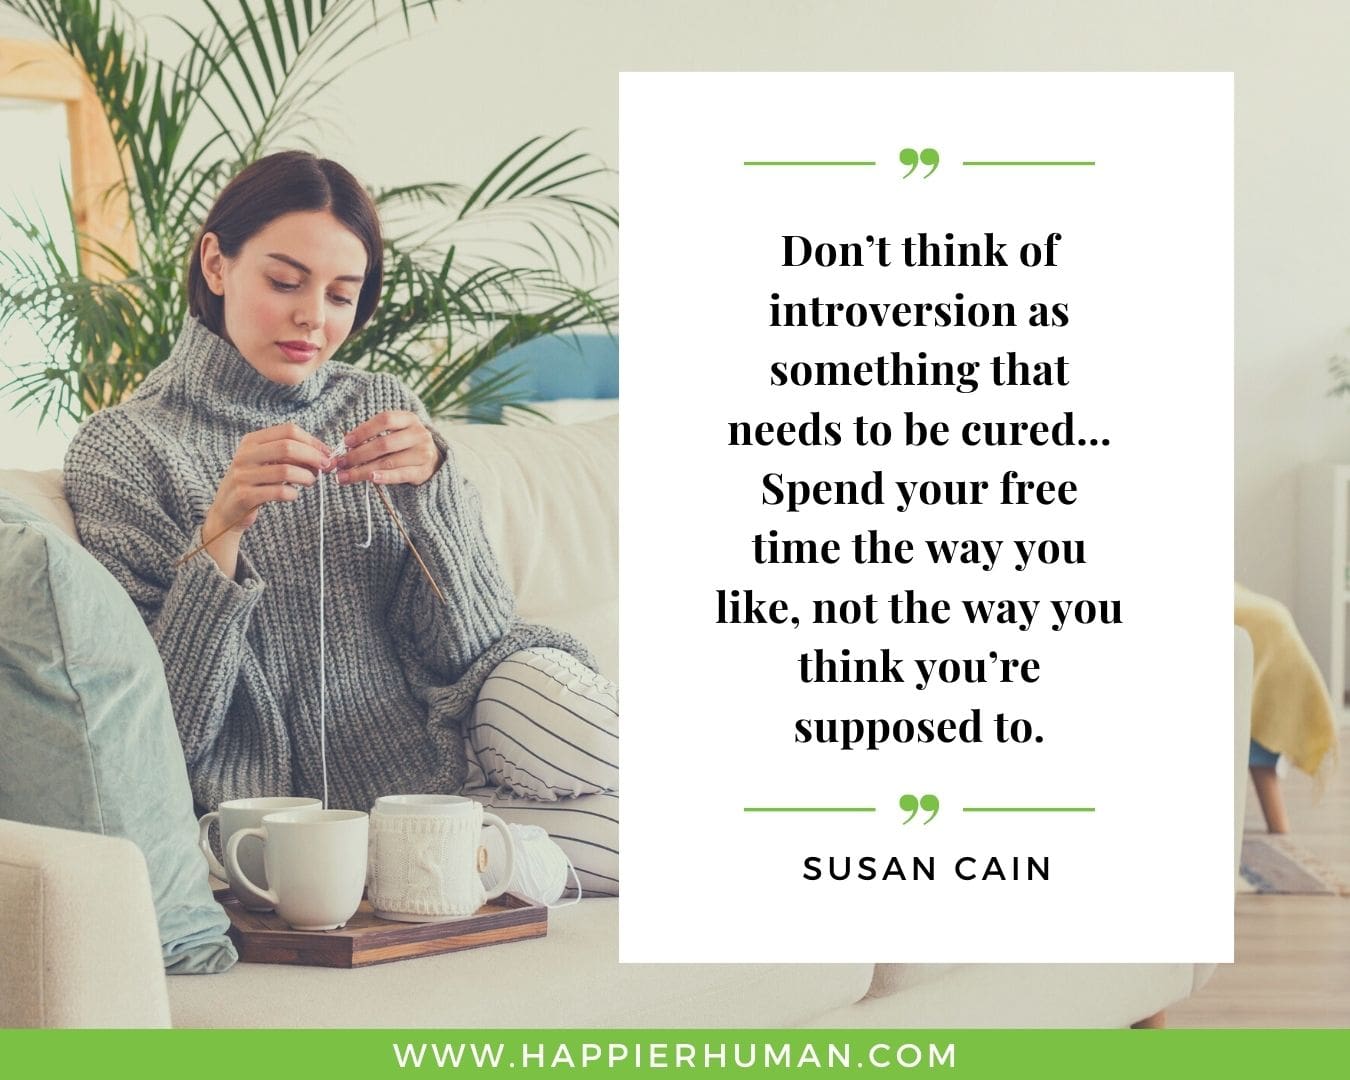 Introvert Quotes - “Don’t think of introversion as something that needs to be cured… Spend your free time the way you like, not the way you think you’re supposed to.” - Susan Cain